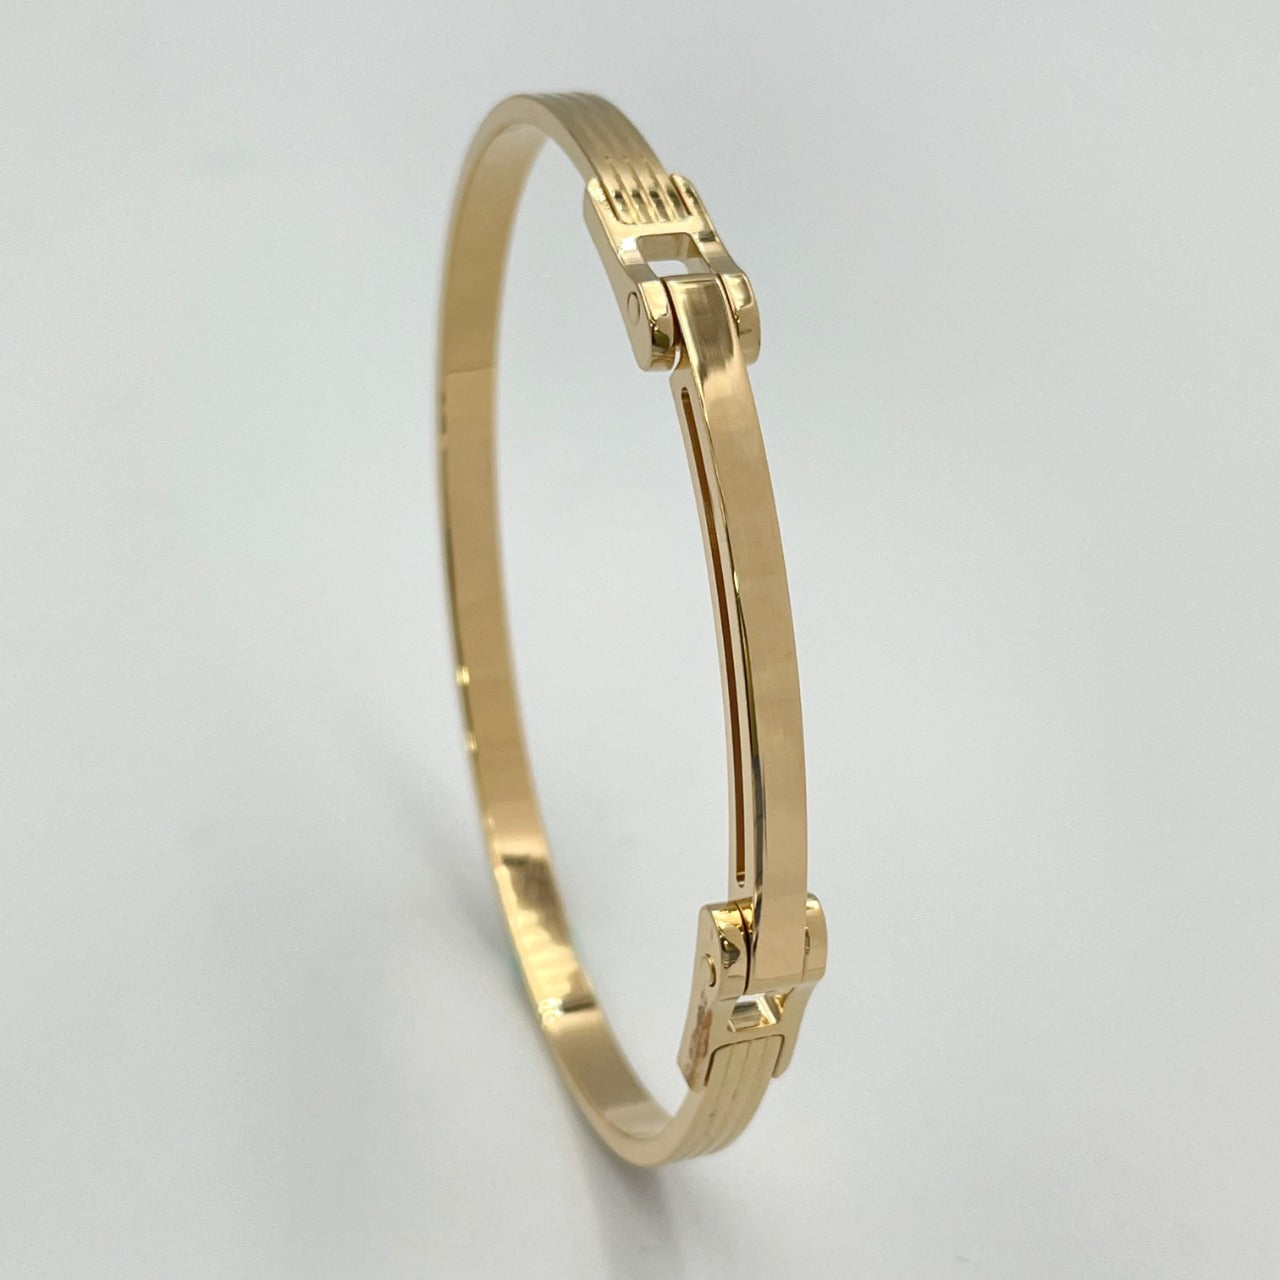 Bracelet MOTION-H 4mm with hinge yellow gold 18k 750